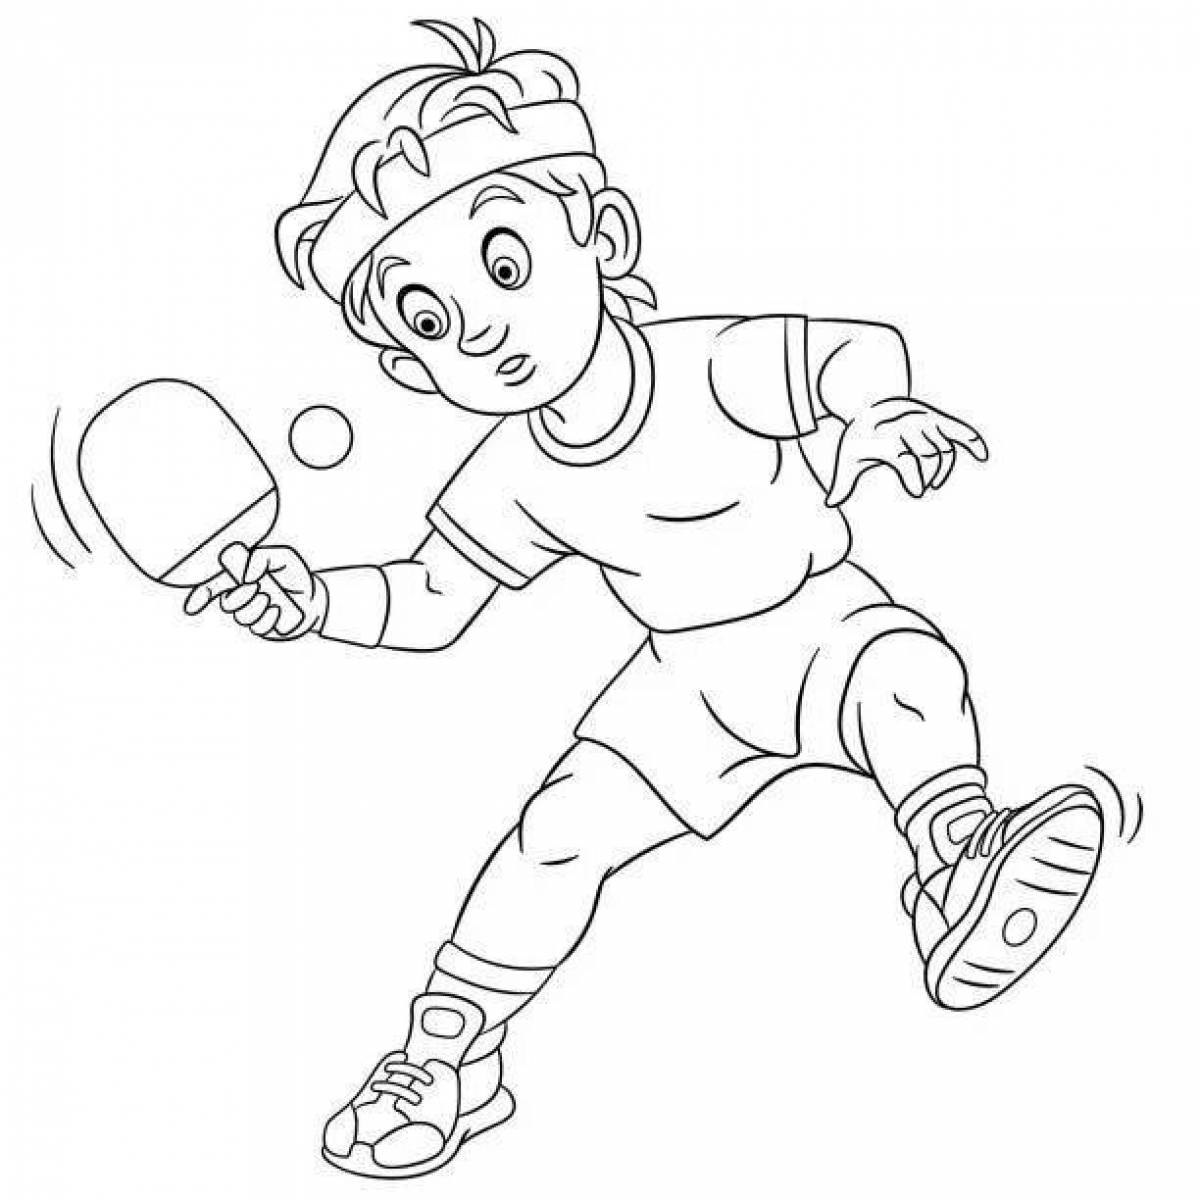 An animated table tennis coloring page